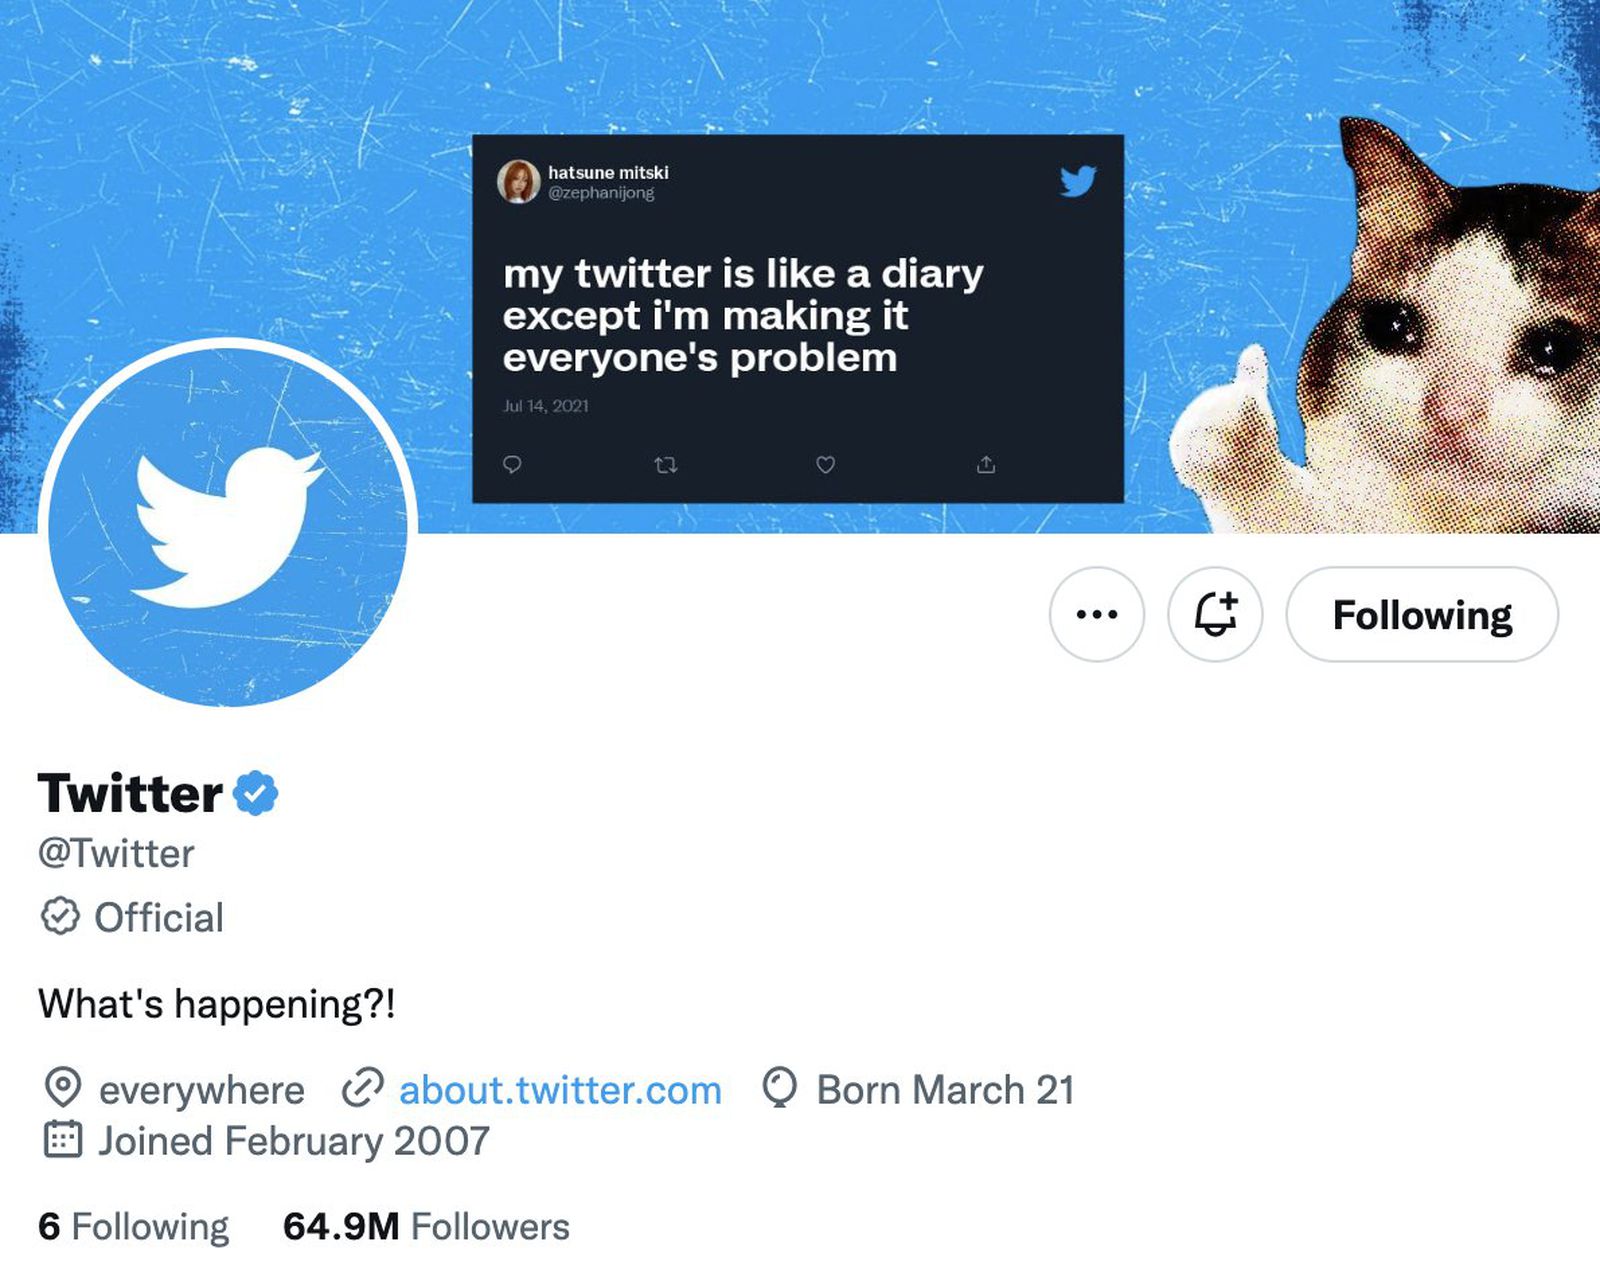 How long does Twitter Blue verification take? - Owlead